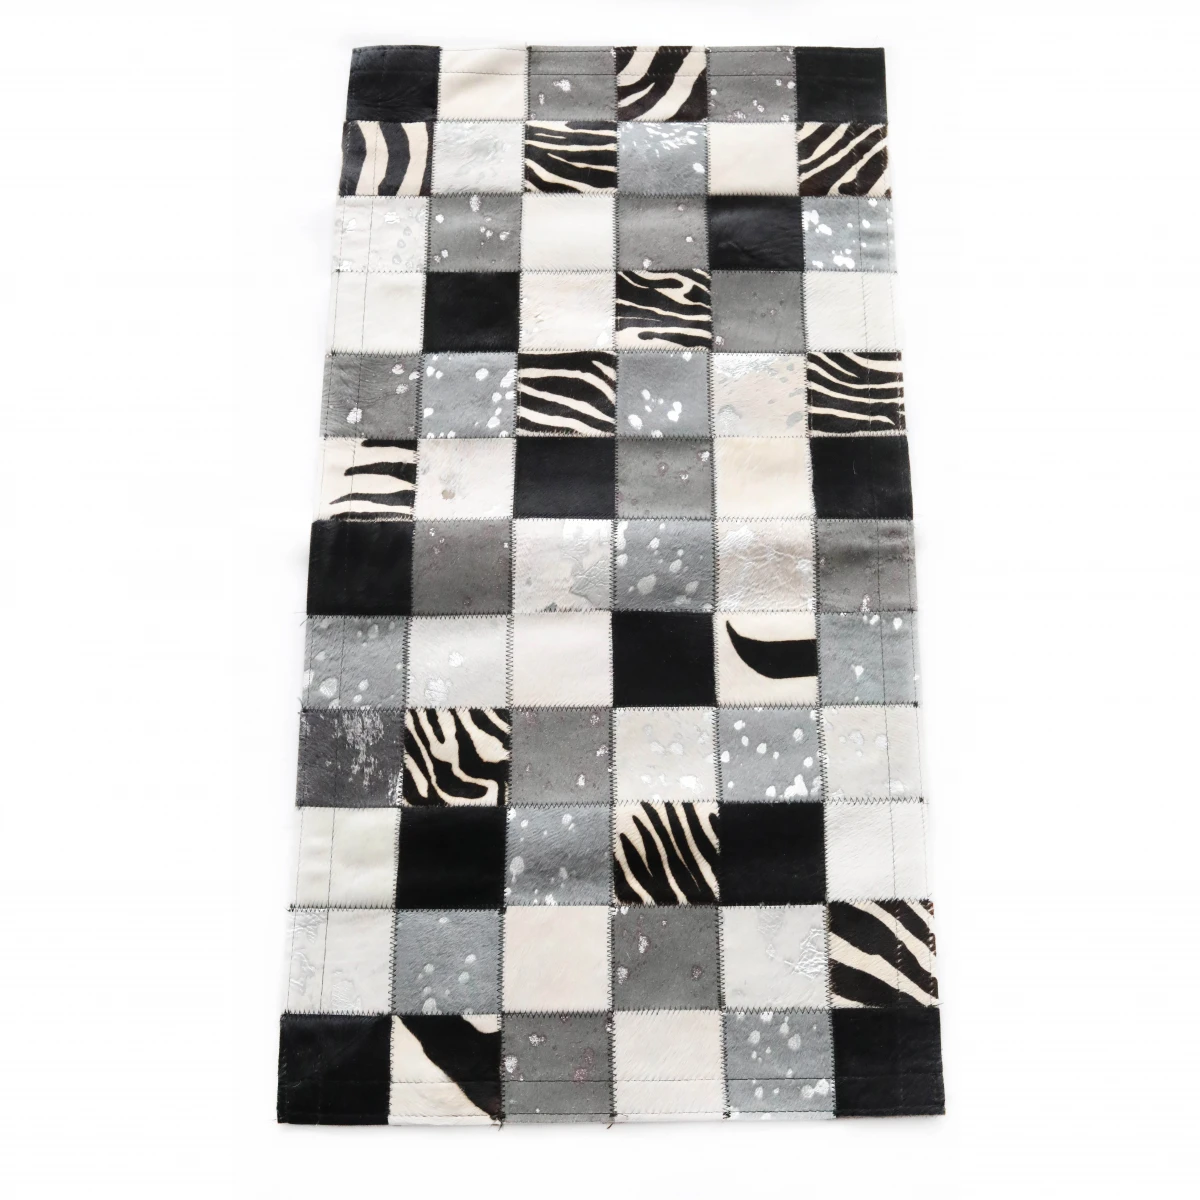 Tapis Patchwork Black and White